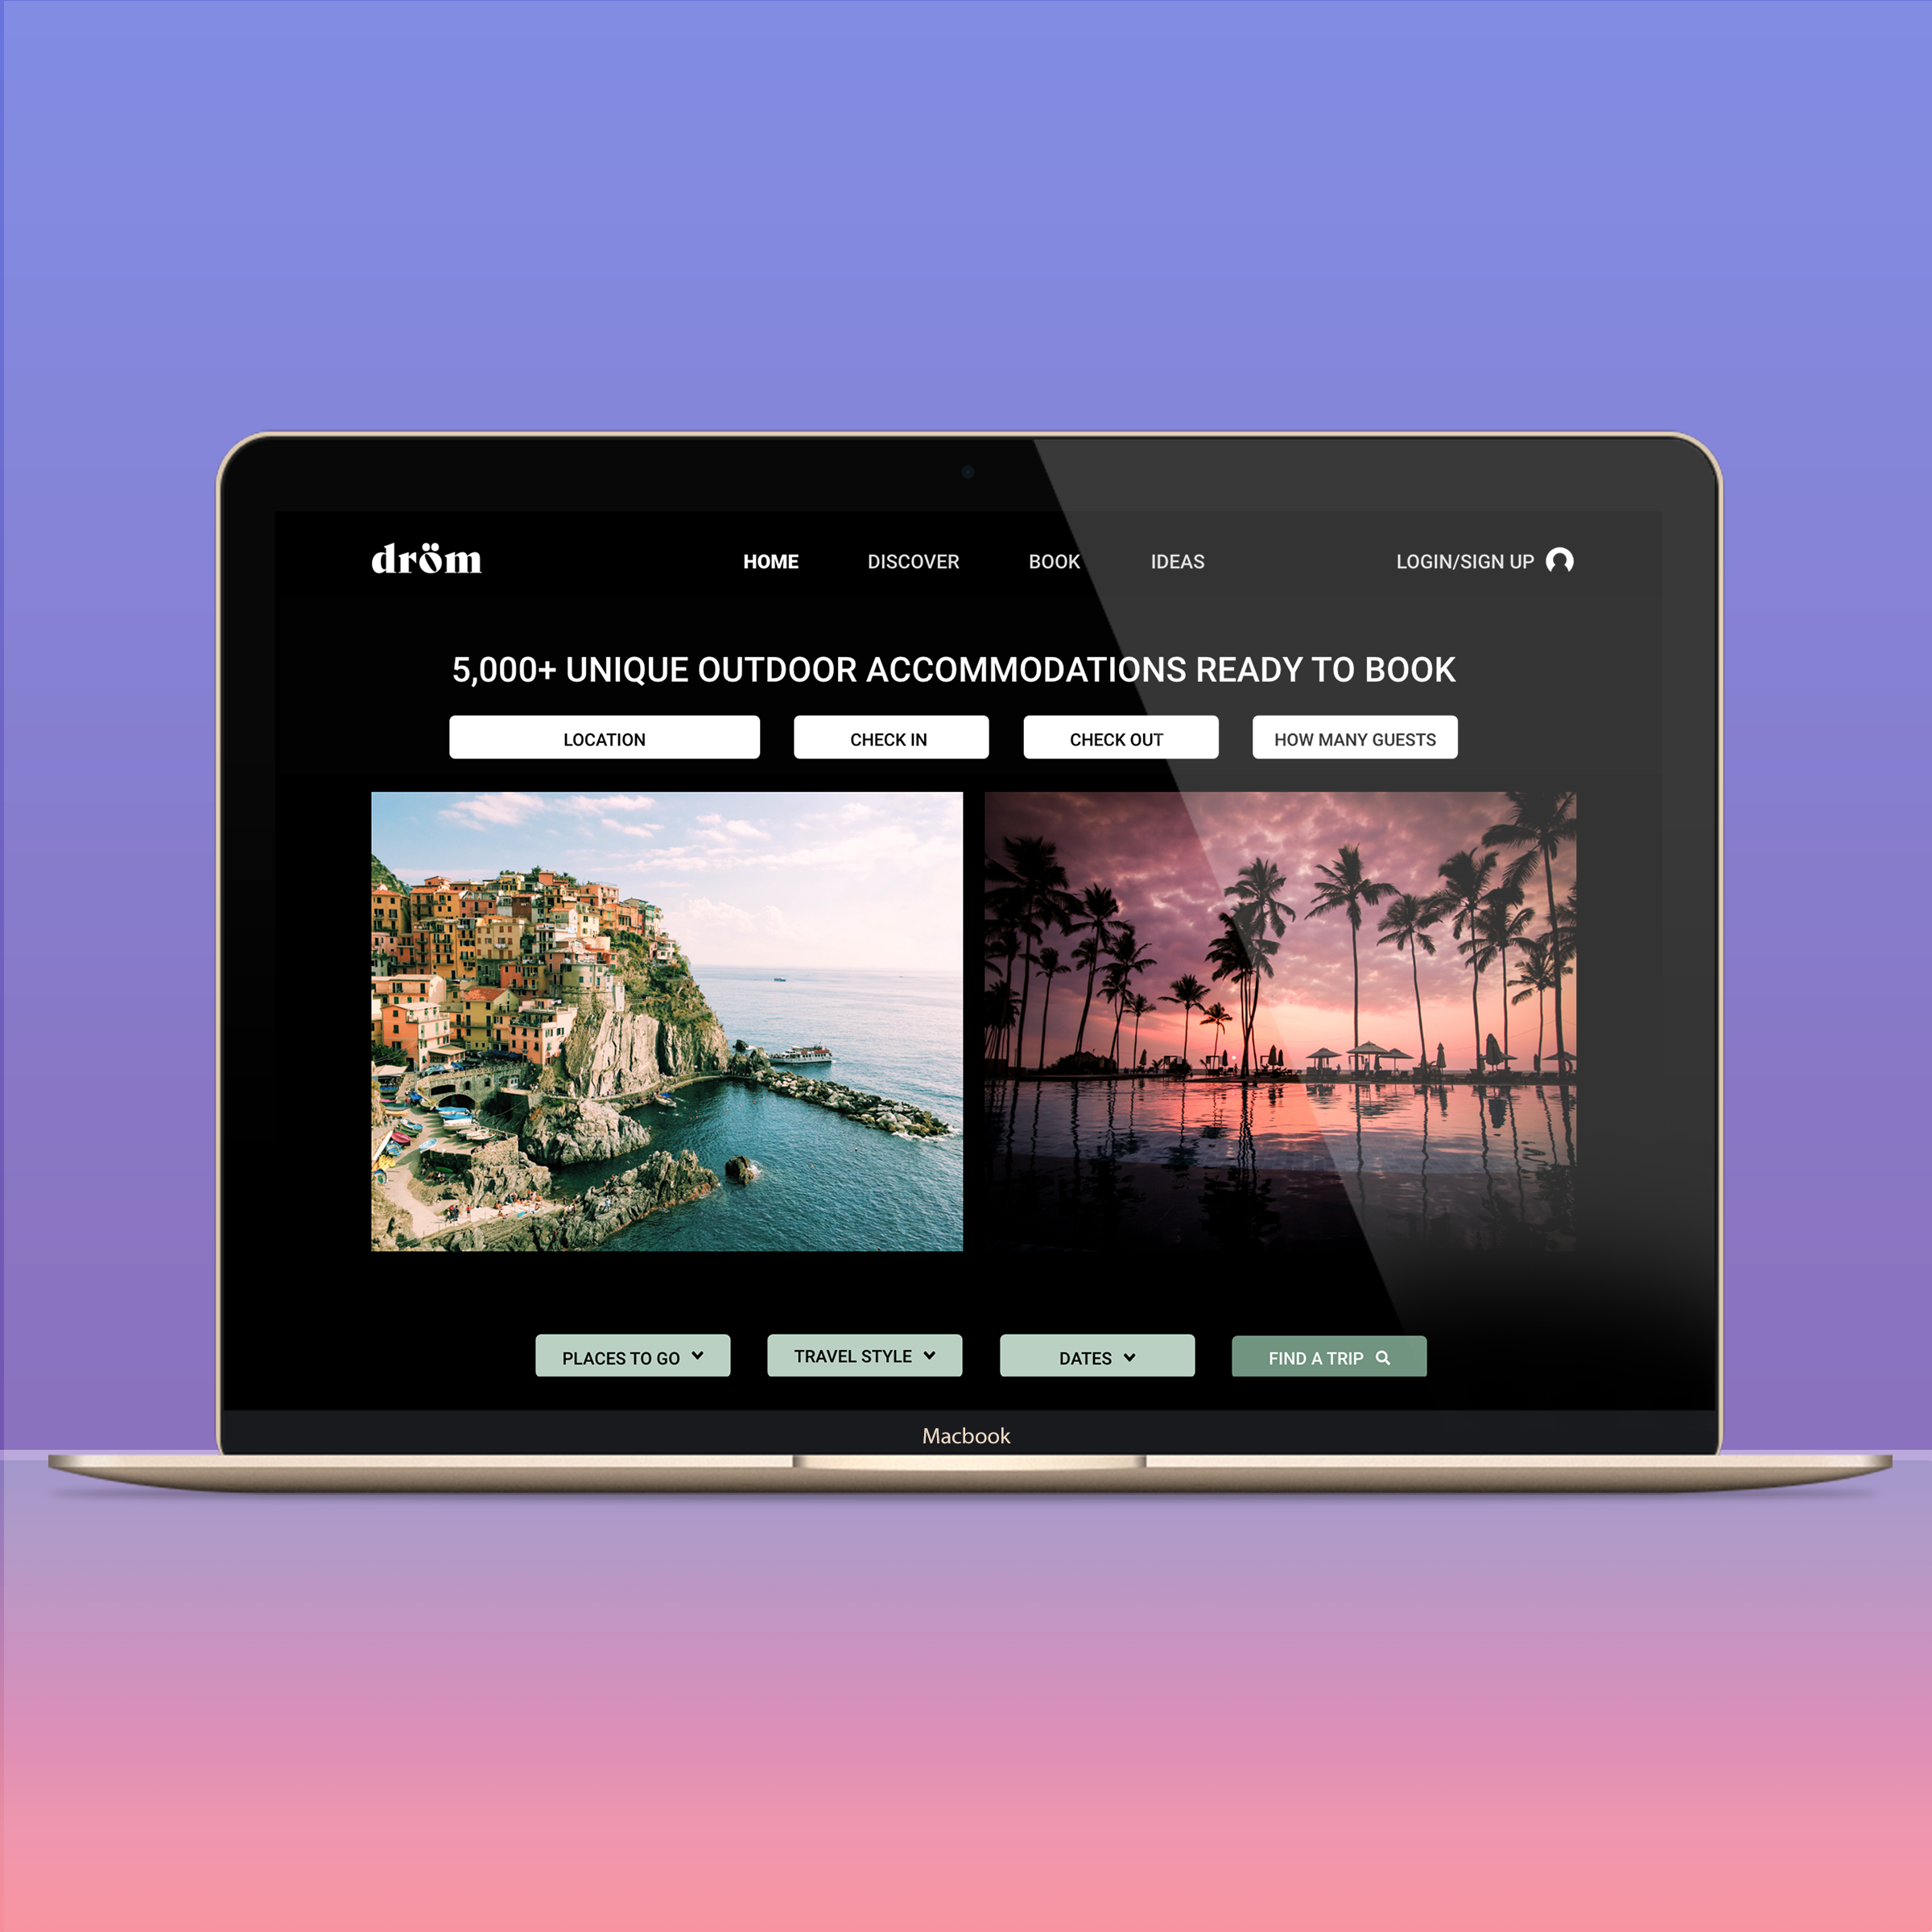 Mockup of a travel website designed by Chris Olson